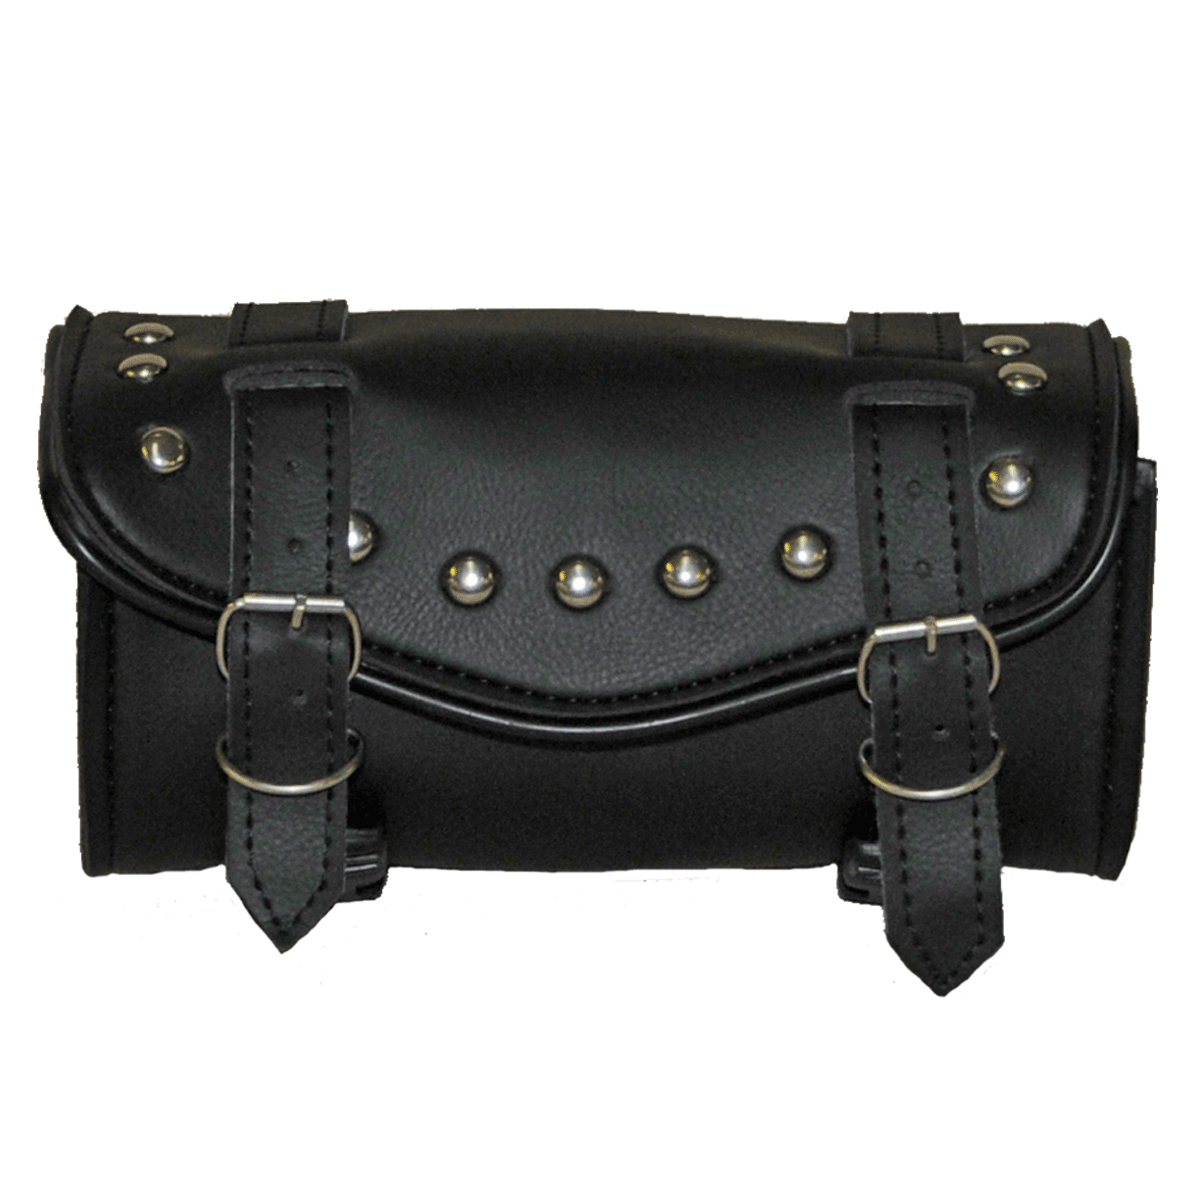 VS103 2 Strap Studded Tool Bag with V-Shaped Flap